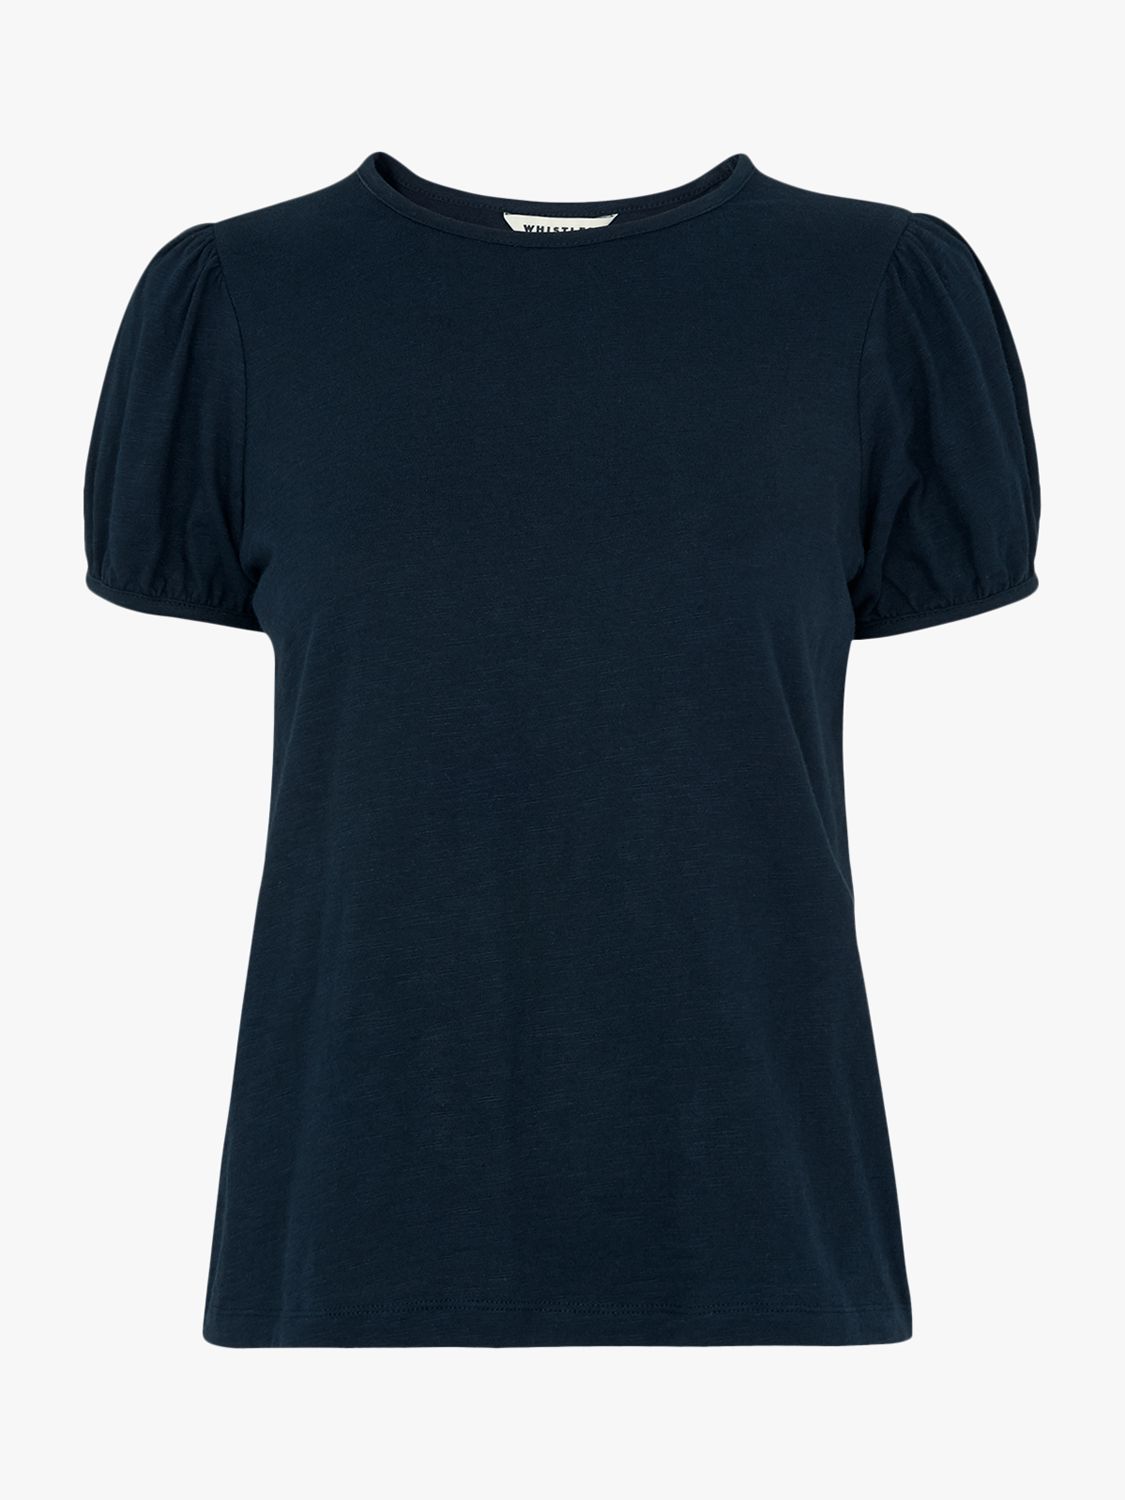 Whistles Puff Sleeve Top, Navy